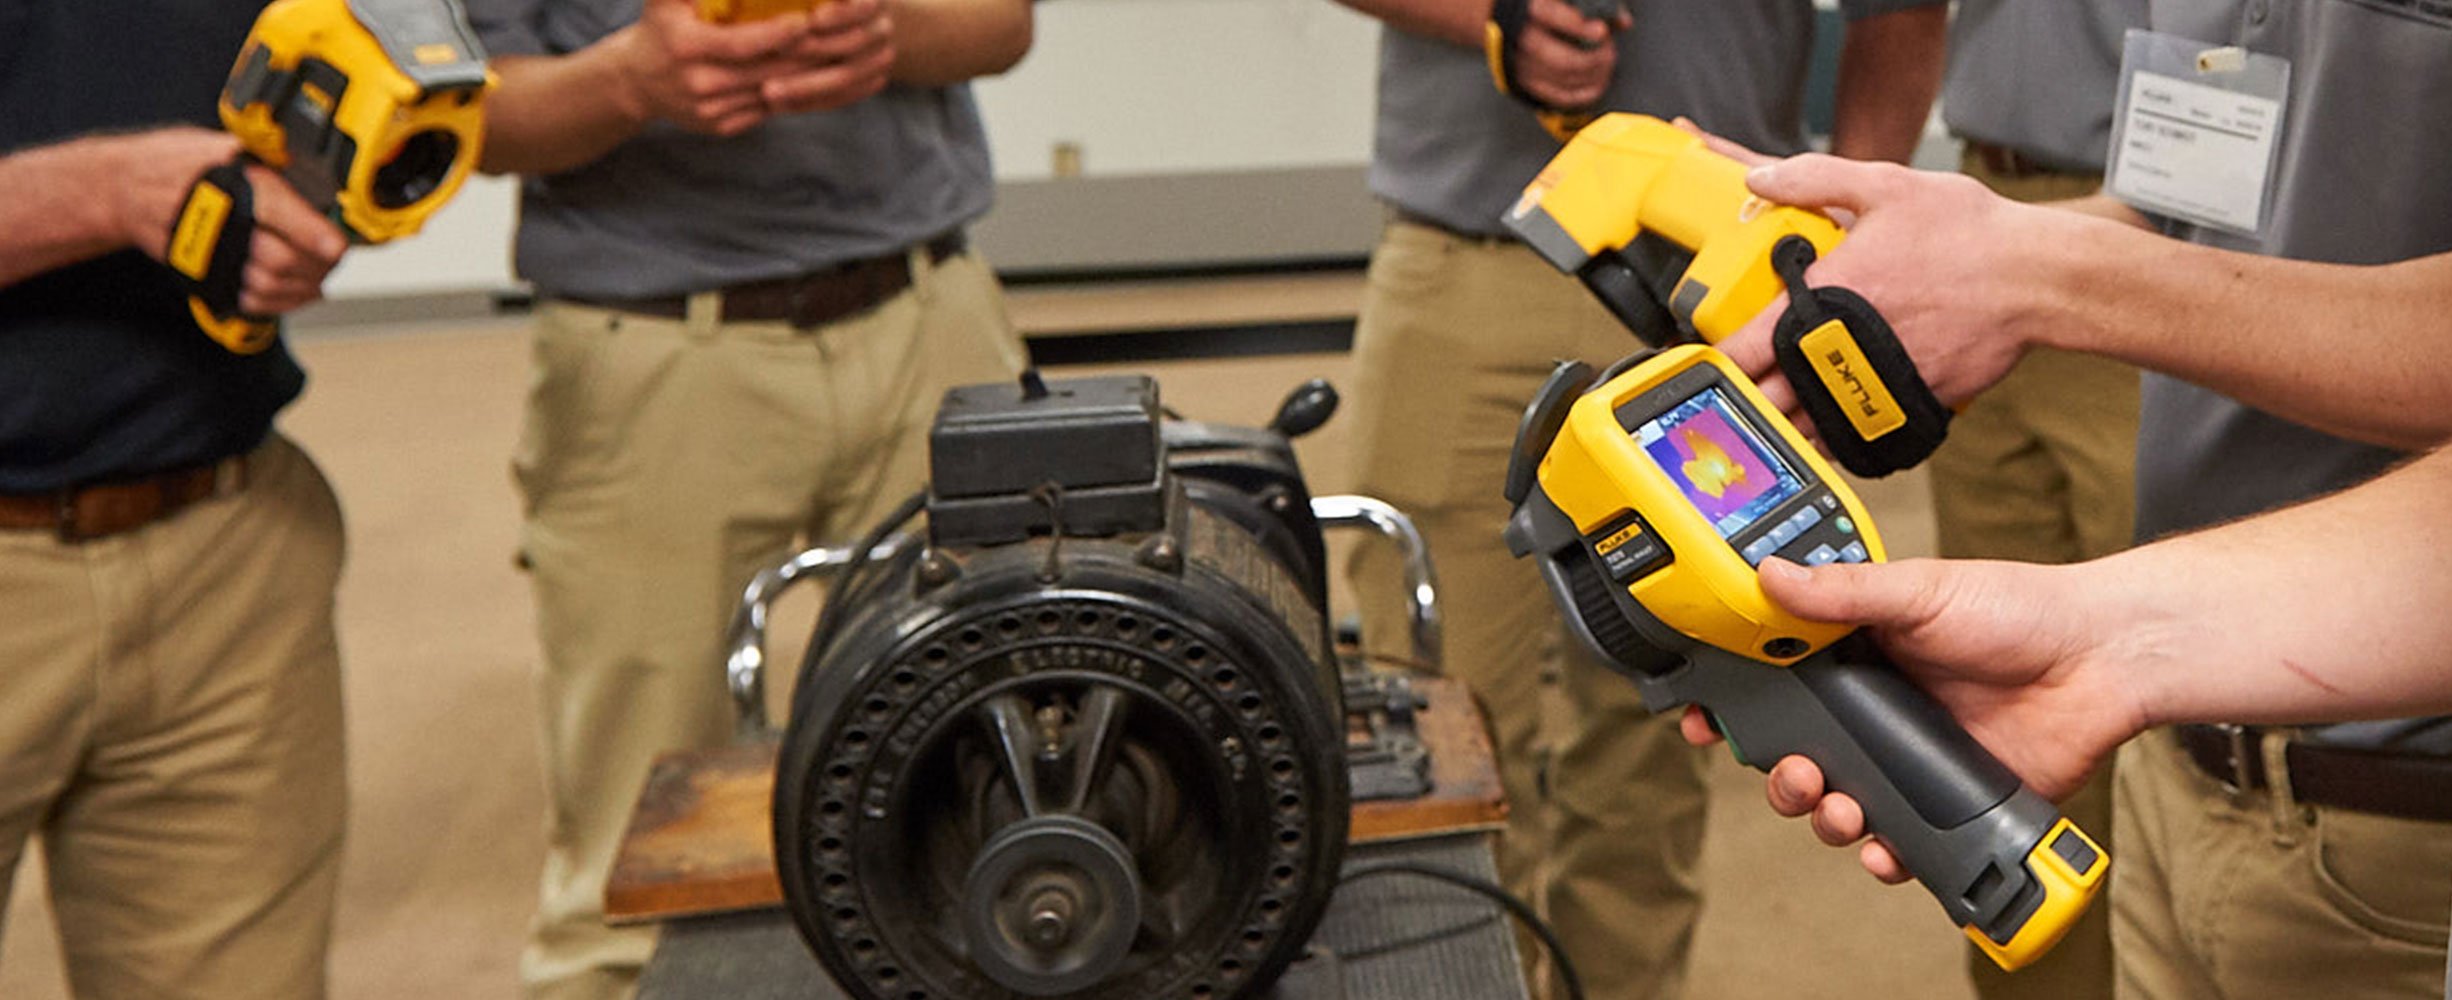 Students inspect a motor with Fluke infrared cameras during a training session